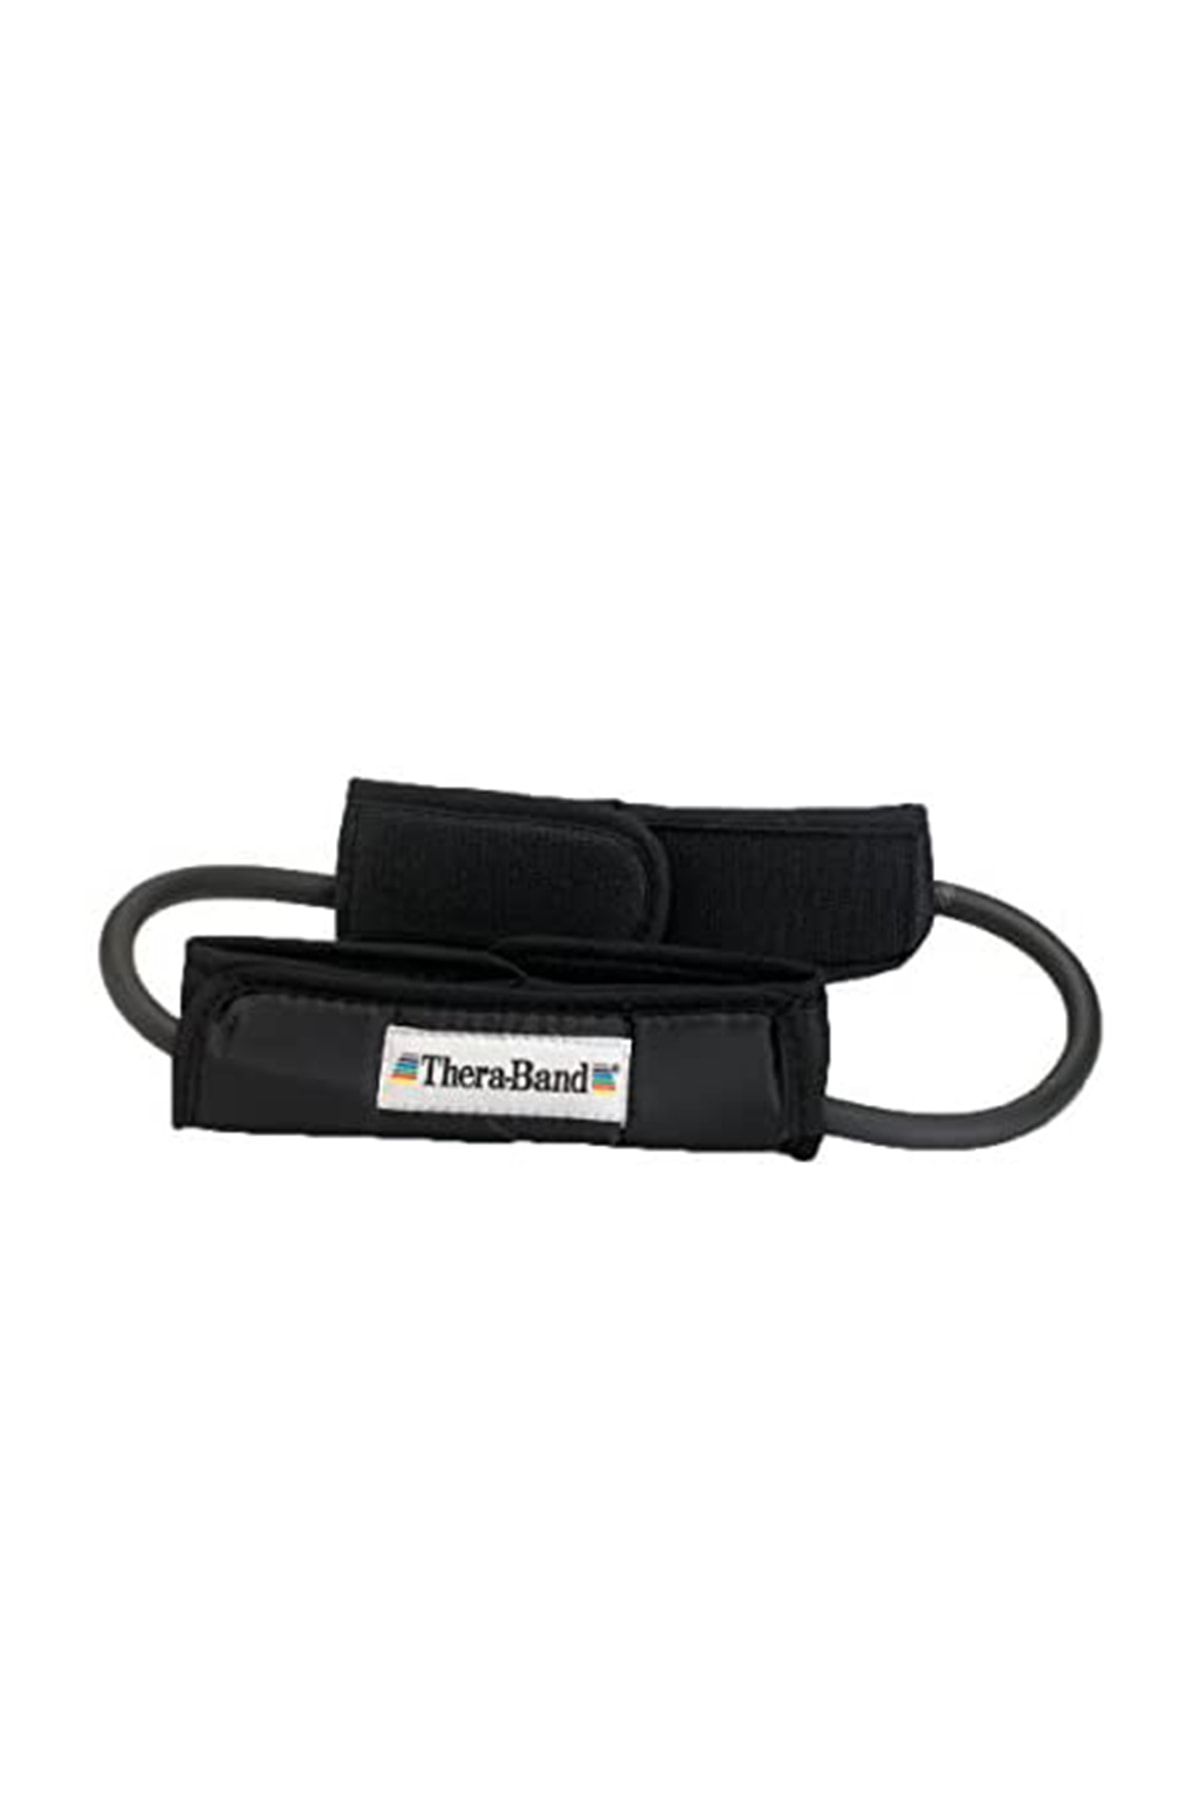 Theraband BLK TUBING LOOP W/PADDED CUFF